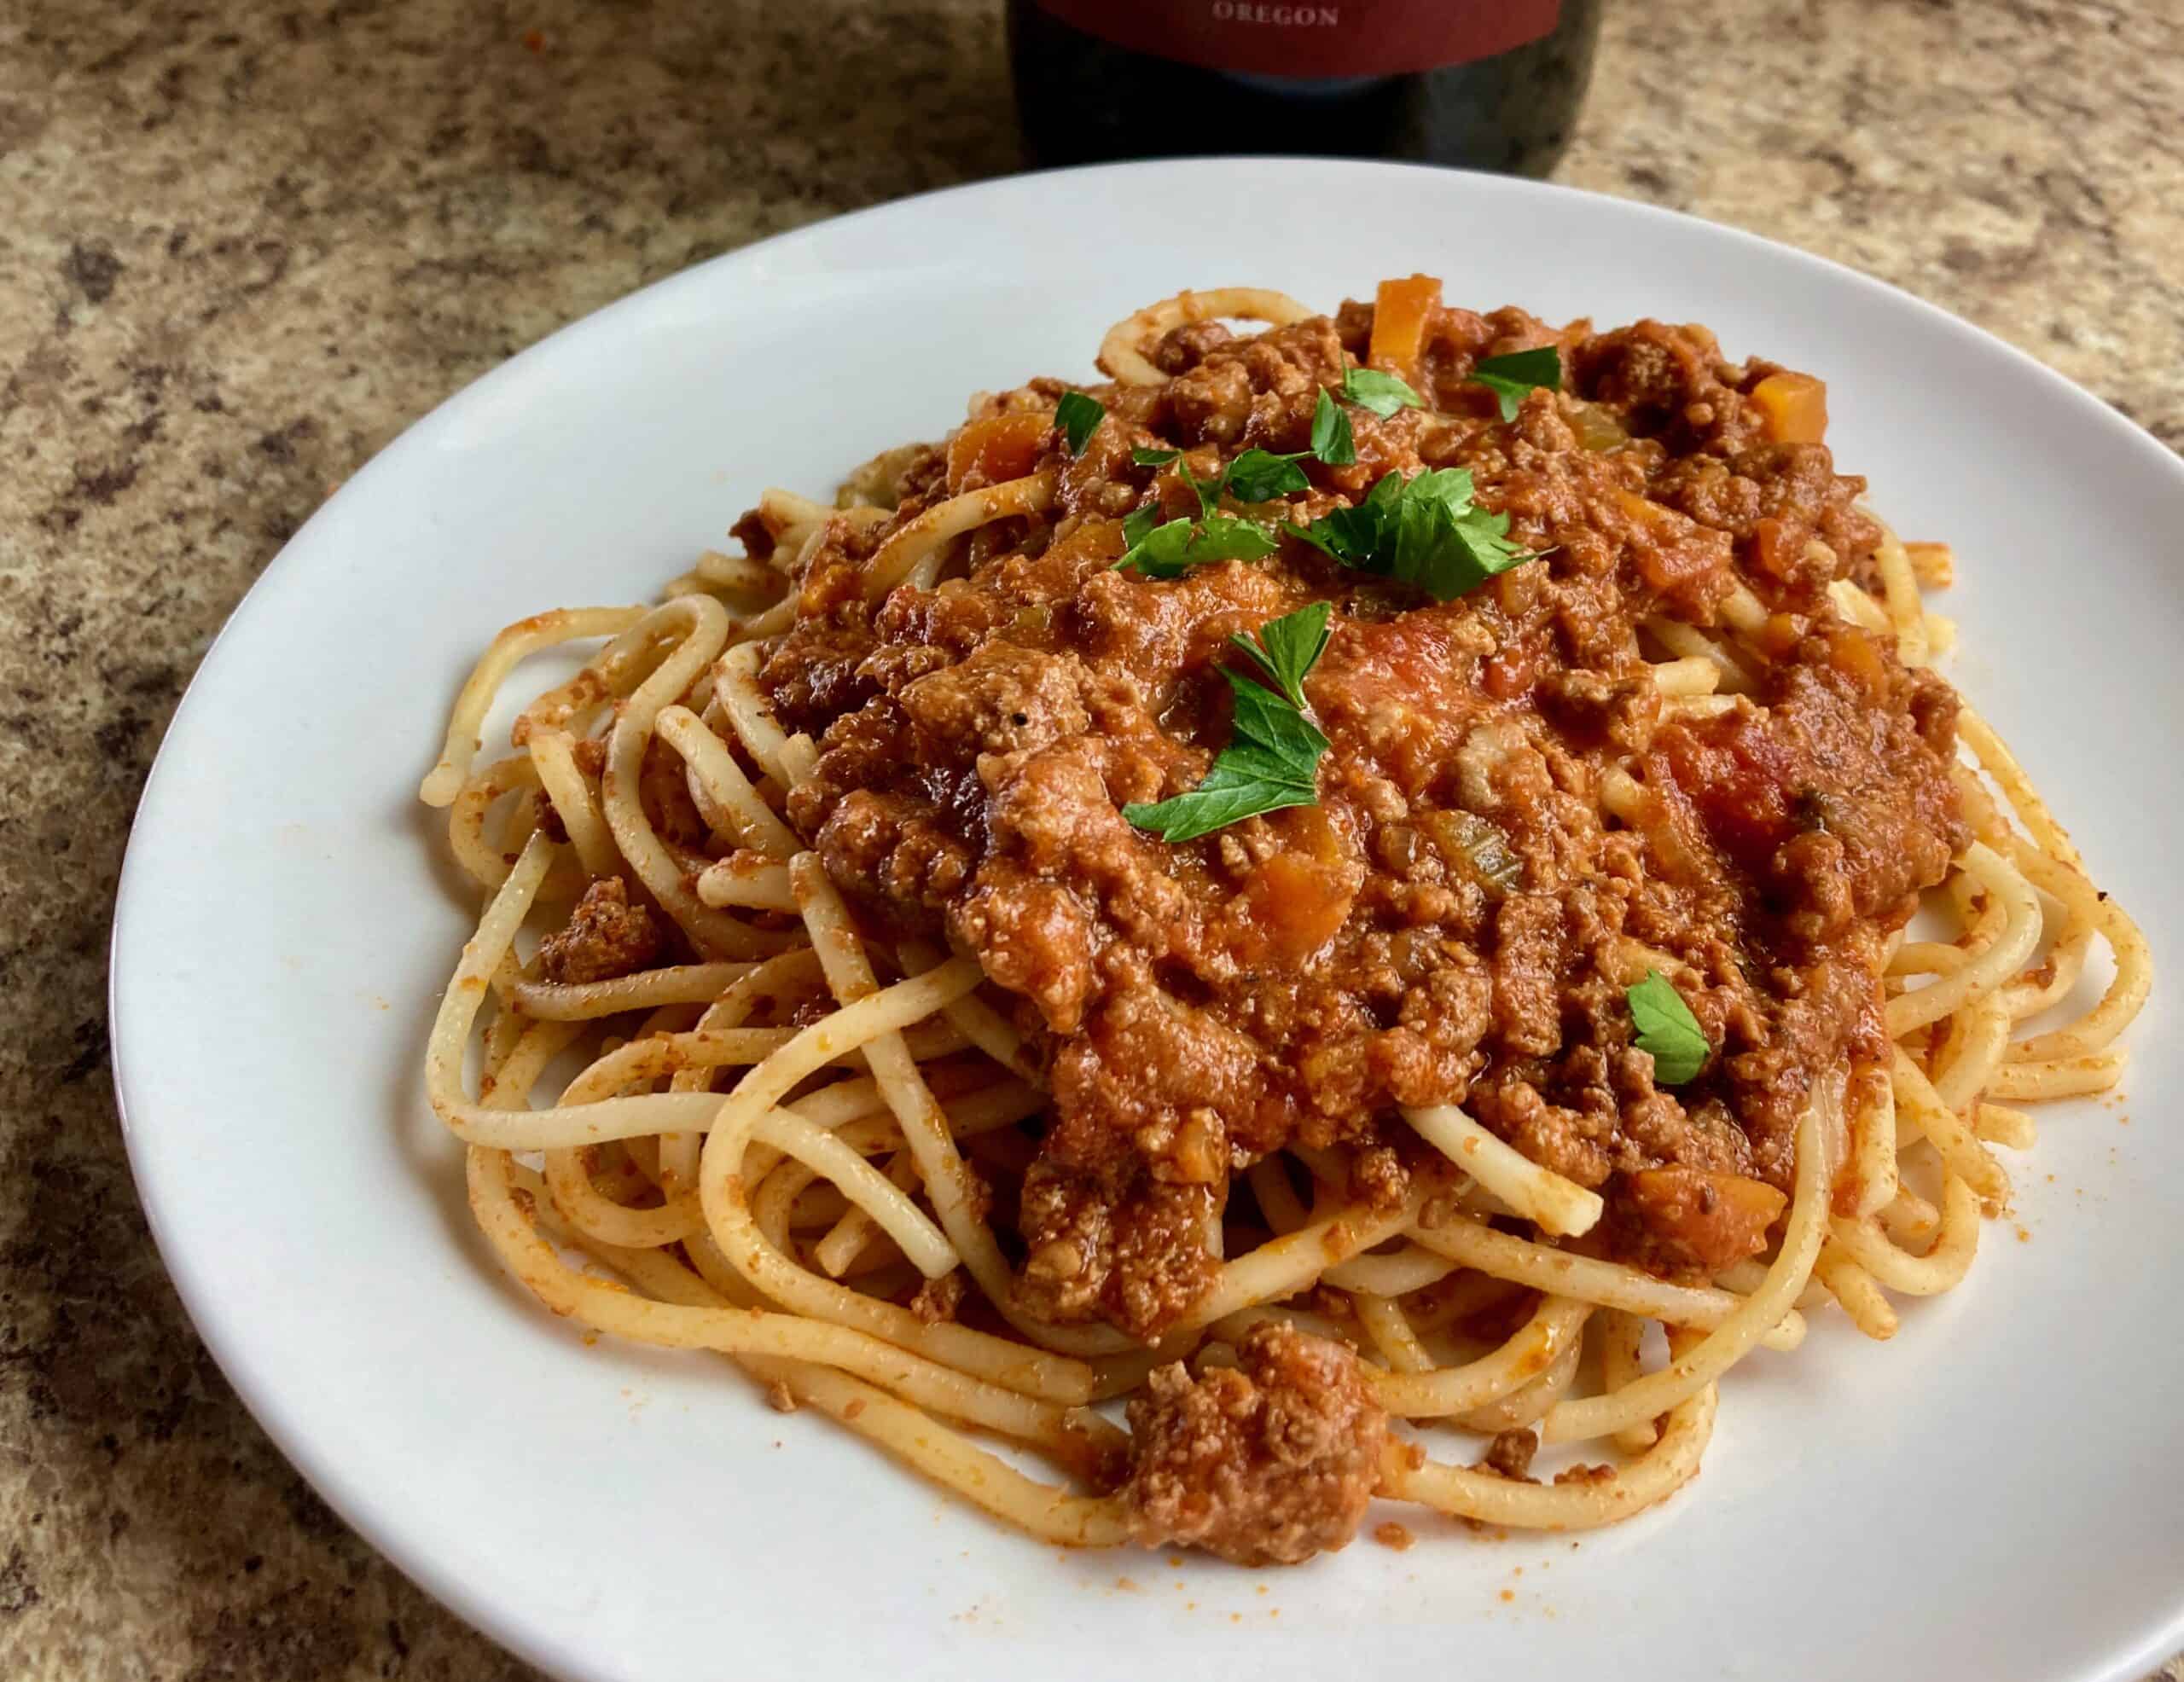 Slow Cooker Turkey Bolognese over spaghetti on white plate garnished with chopped parsley.